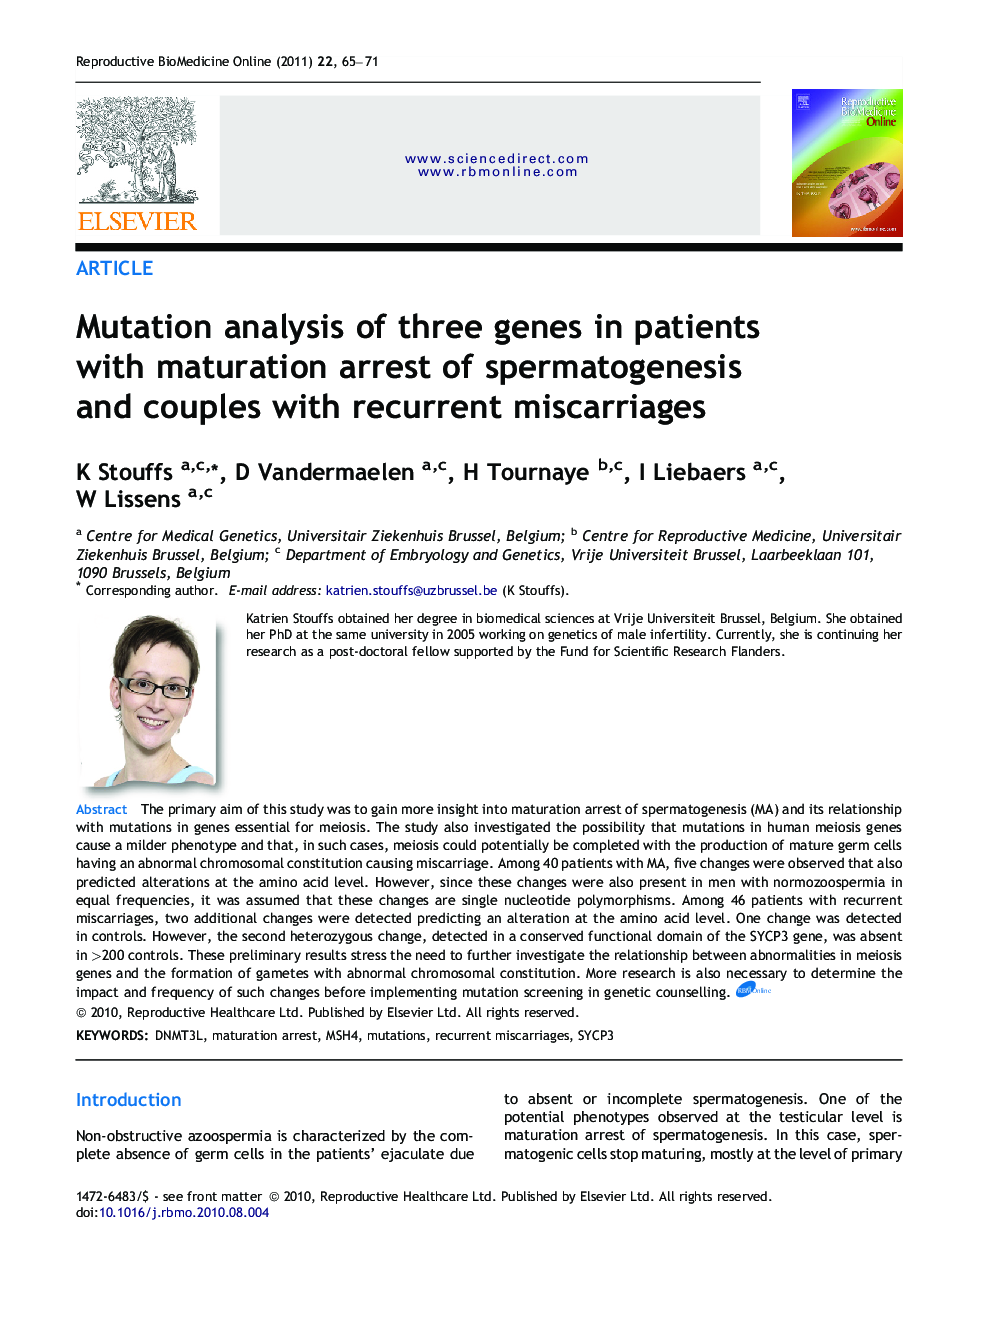 Mutation analysis of three genes in patients with maturation arrest of spermatogenesis and couples with recurrent miscarriages 